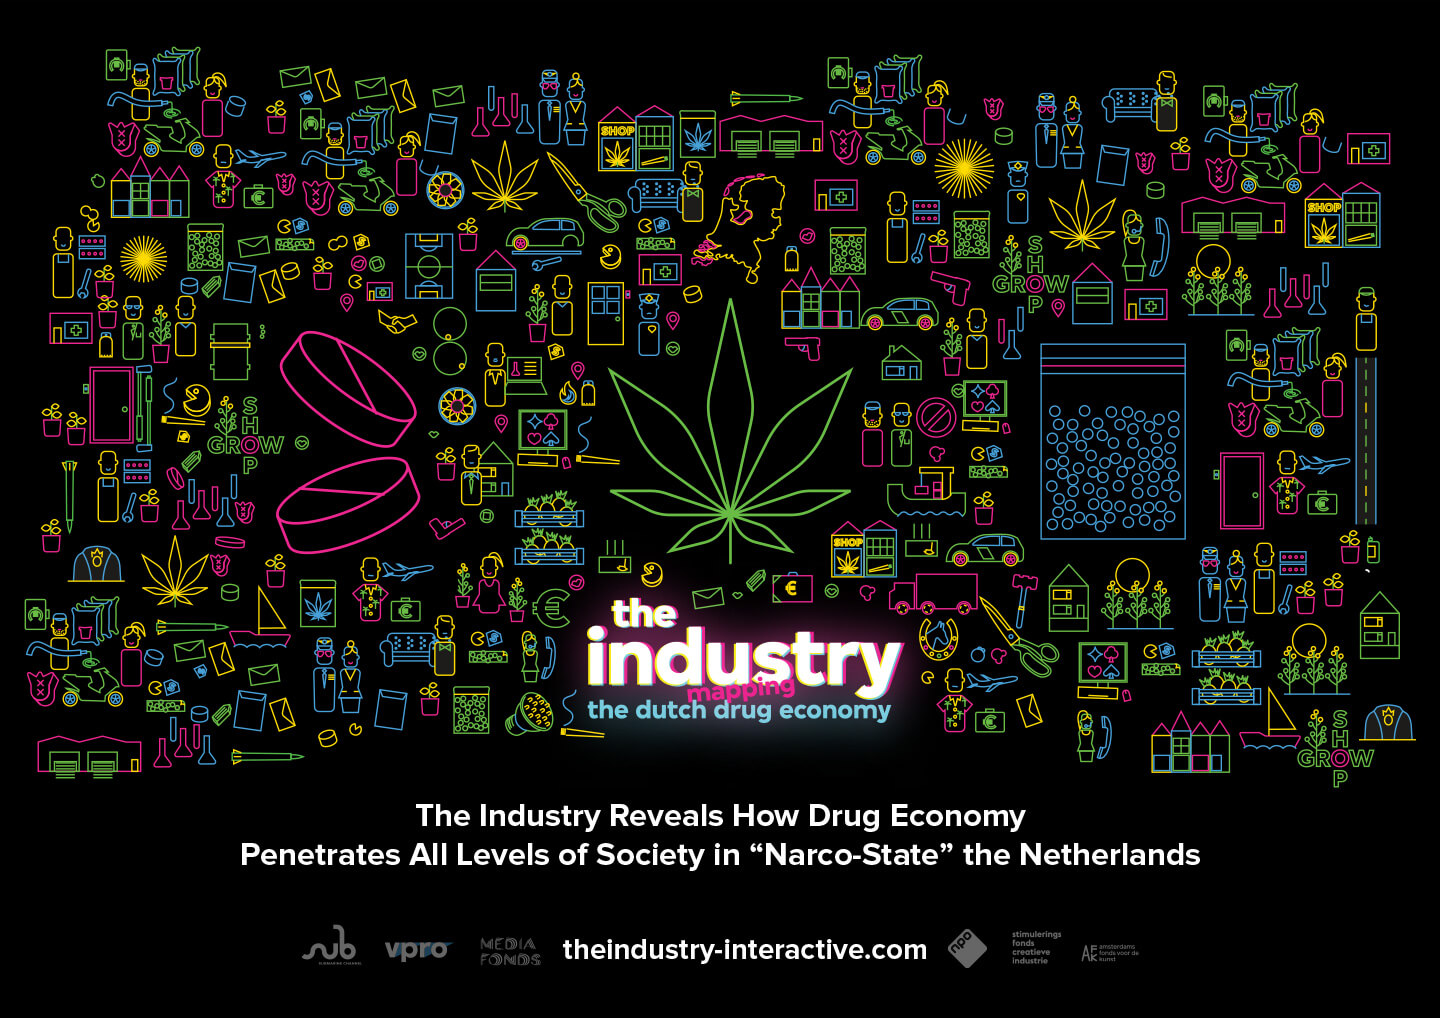 The Industry presskit